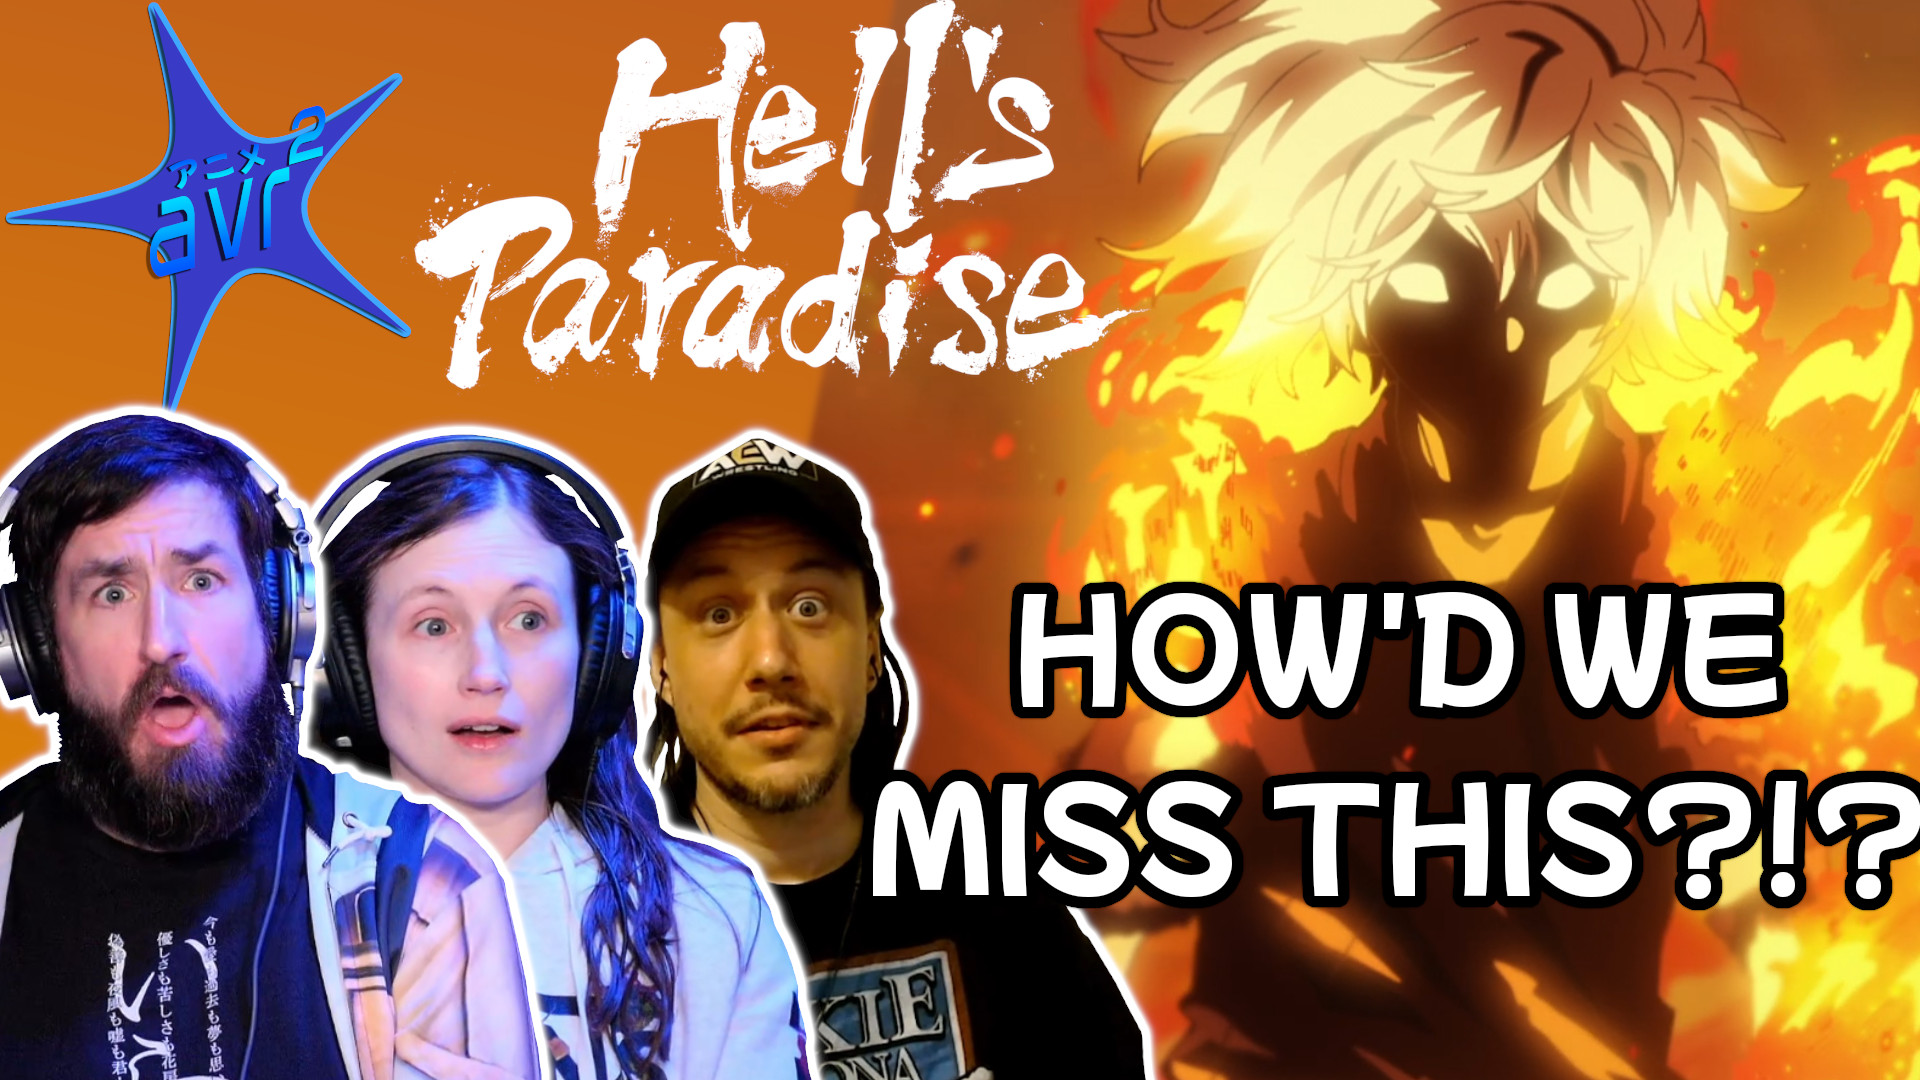 HE'S A MONSTER 😮 Hell's Paradise Episode 2 Was a Fight to the Death 💀 